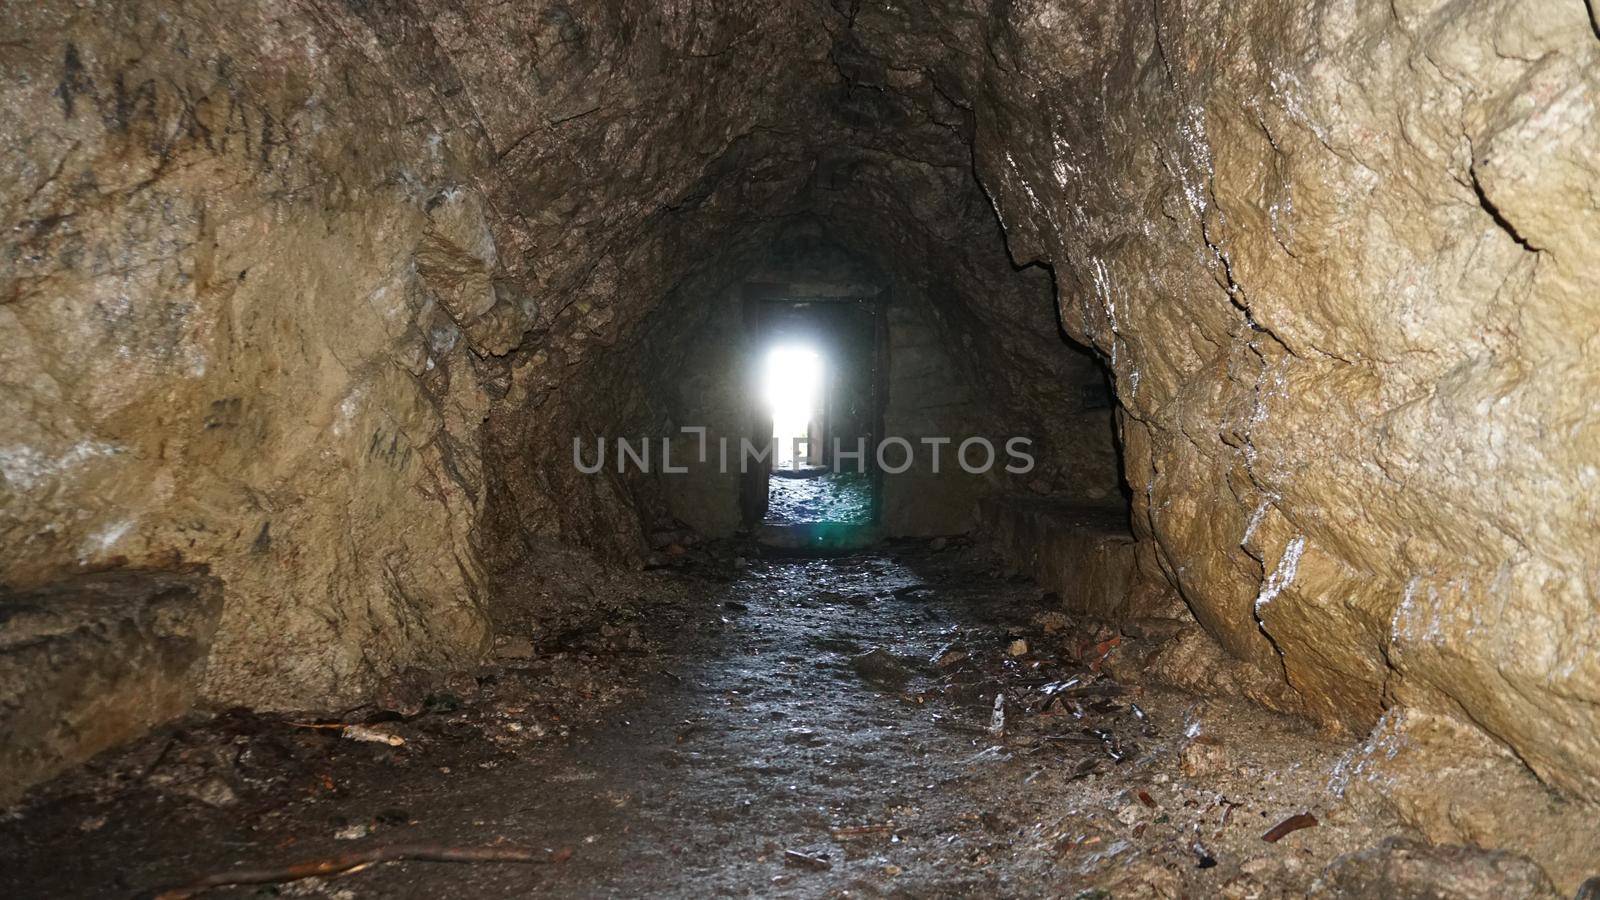 Light and exit at the end of the wet cave. The rays of the sun fall on the stone damp walls. An artificial cave in the mountain. A passage to the video door was made. Bright light at the end of tunnel